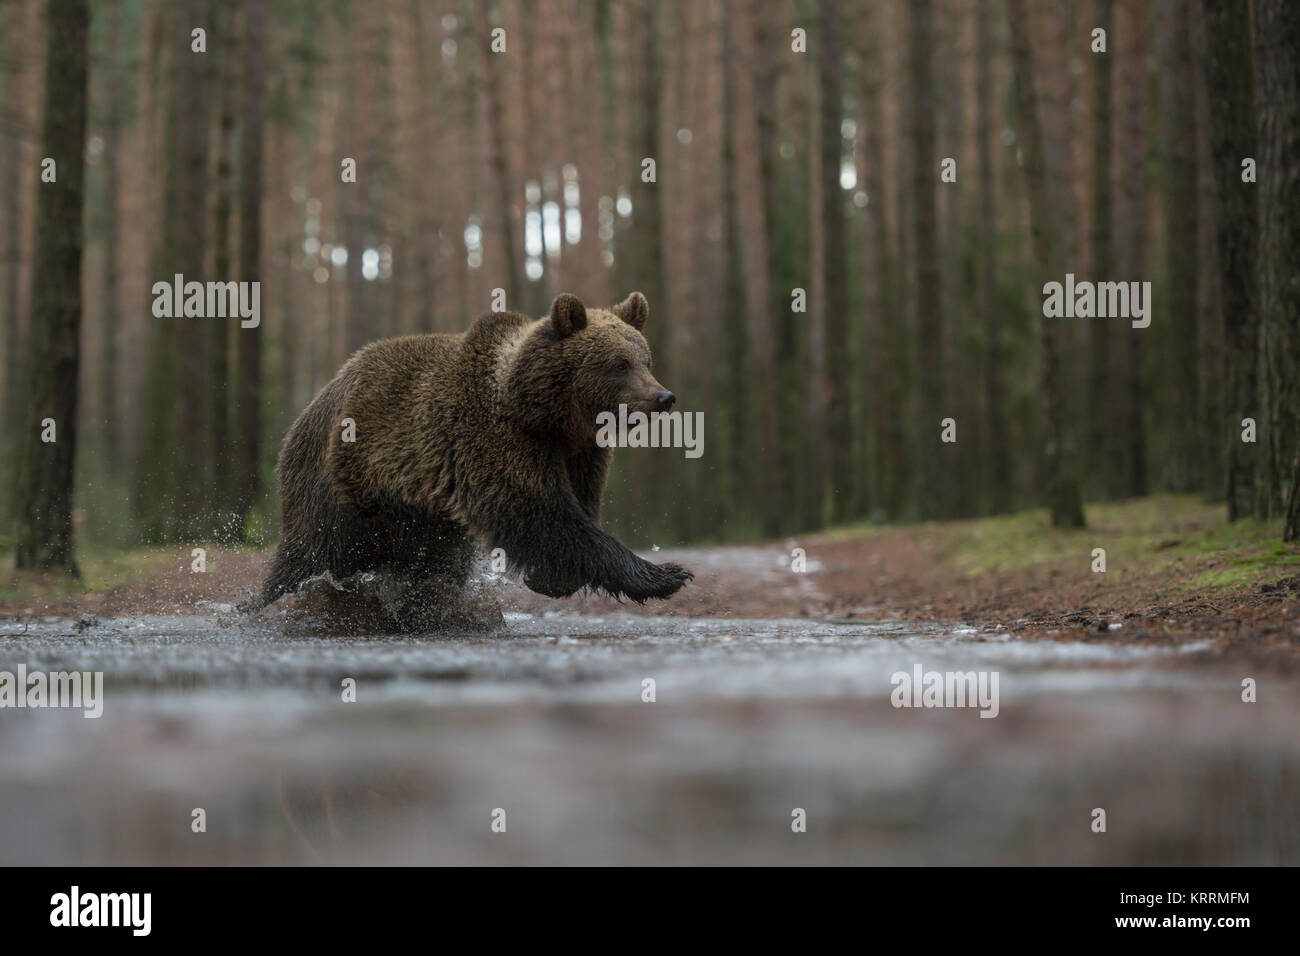 Brown Bear / Braunbaer ( Ursus arctos ), young cub, running fast, jumping through a frozen puddle, crossing a forest road, in winter, Europe. Stock Photo